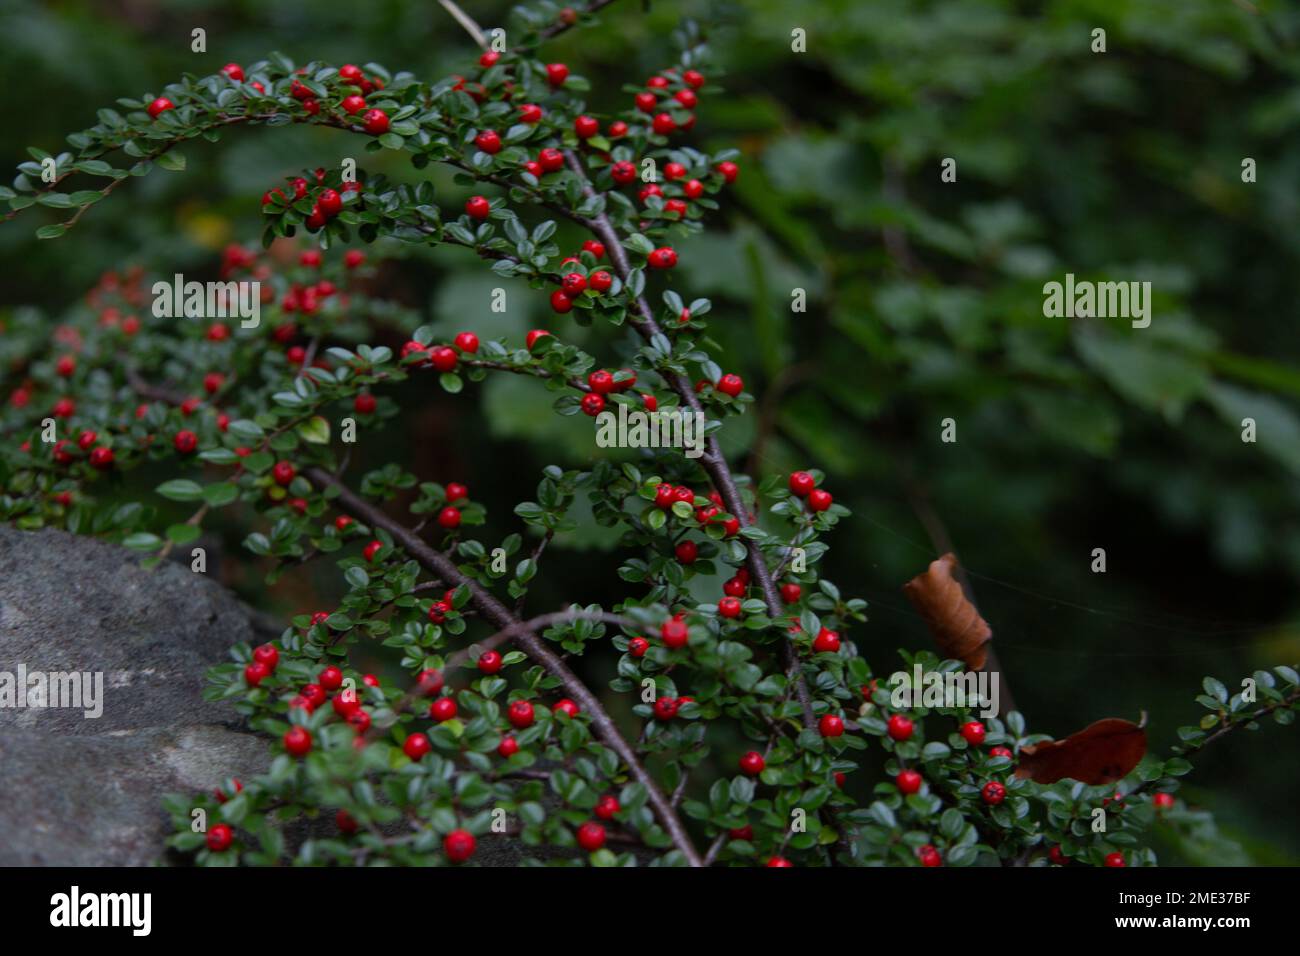 Highbush cranberry with ripe red berries and green leaves Stock Photo